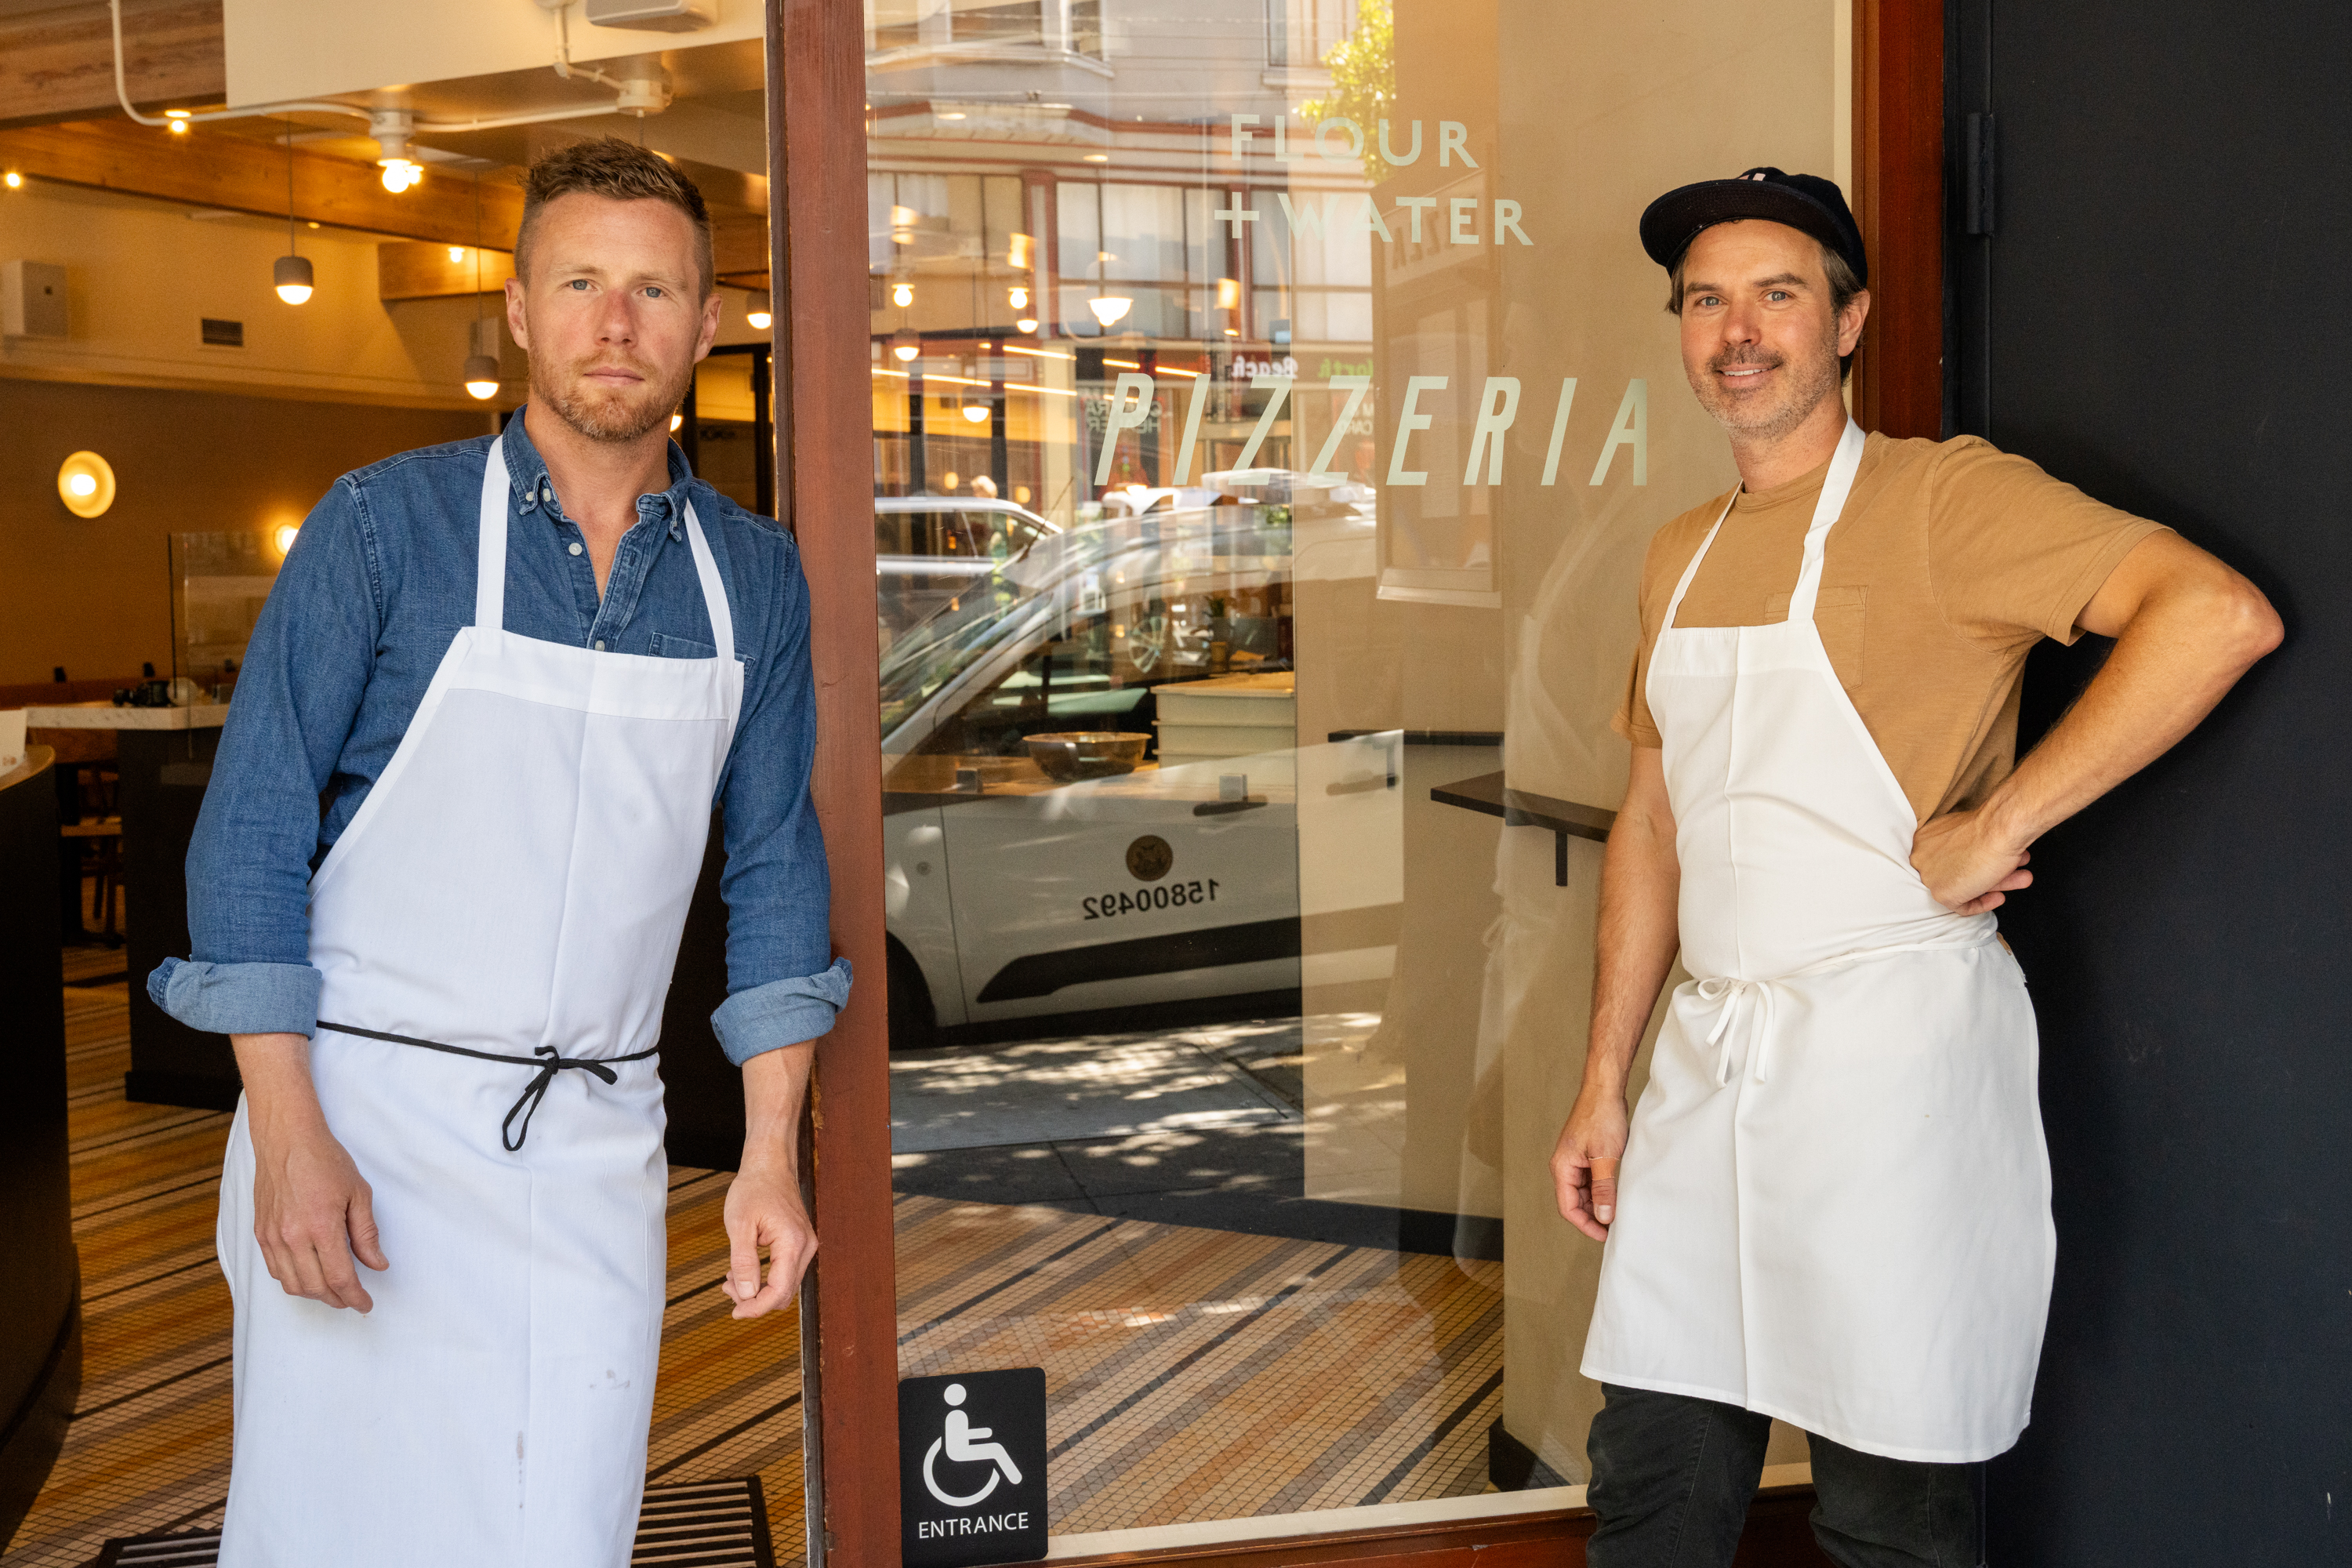 Thomas McNaughton, left, and Ryan Pollnow, right, of Flour + Water Pizzeria pose for a portrait outside their new restaurant in San Francisco on Aug. 10, 2023.